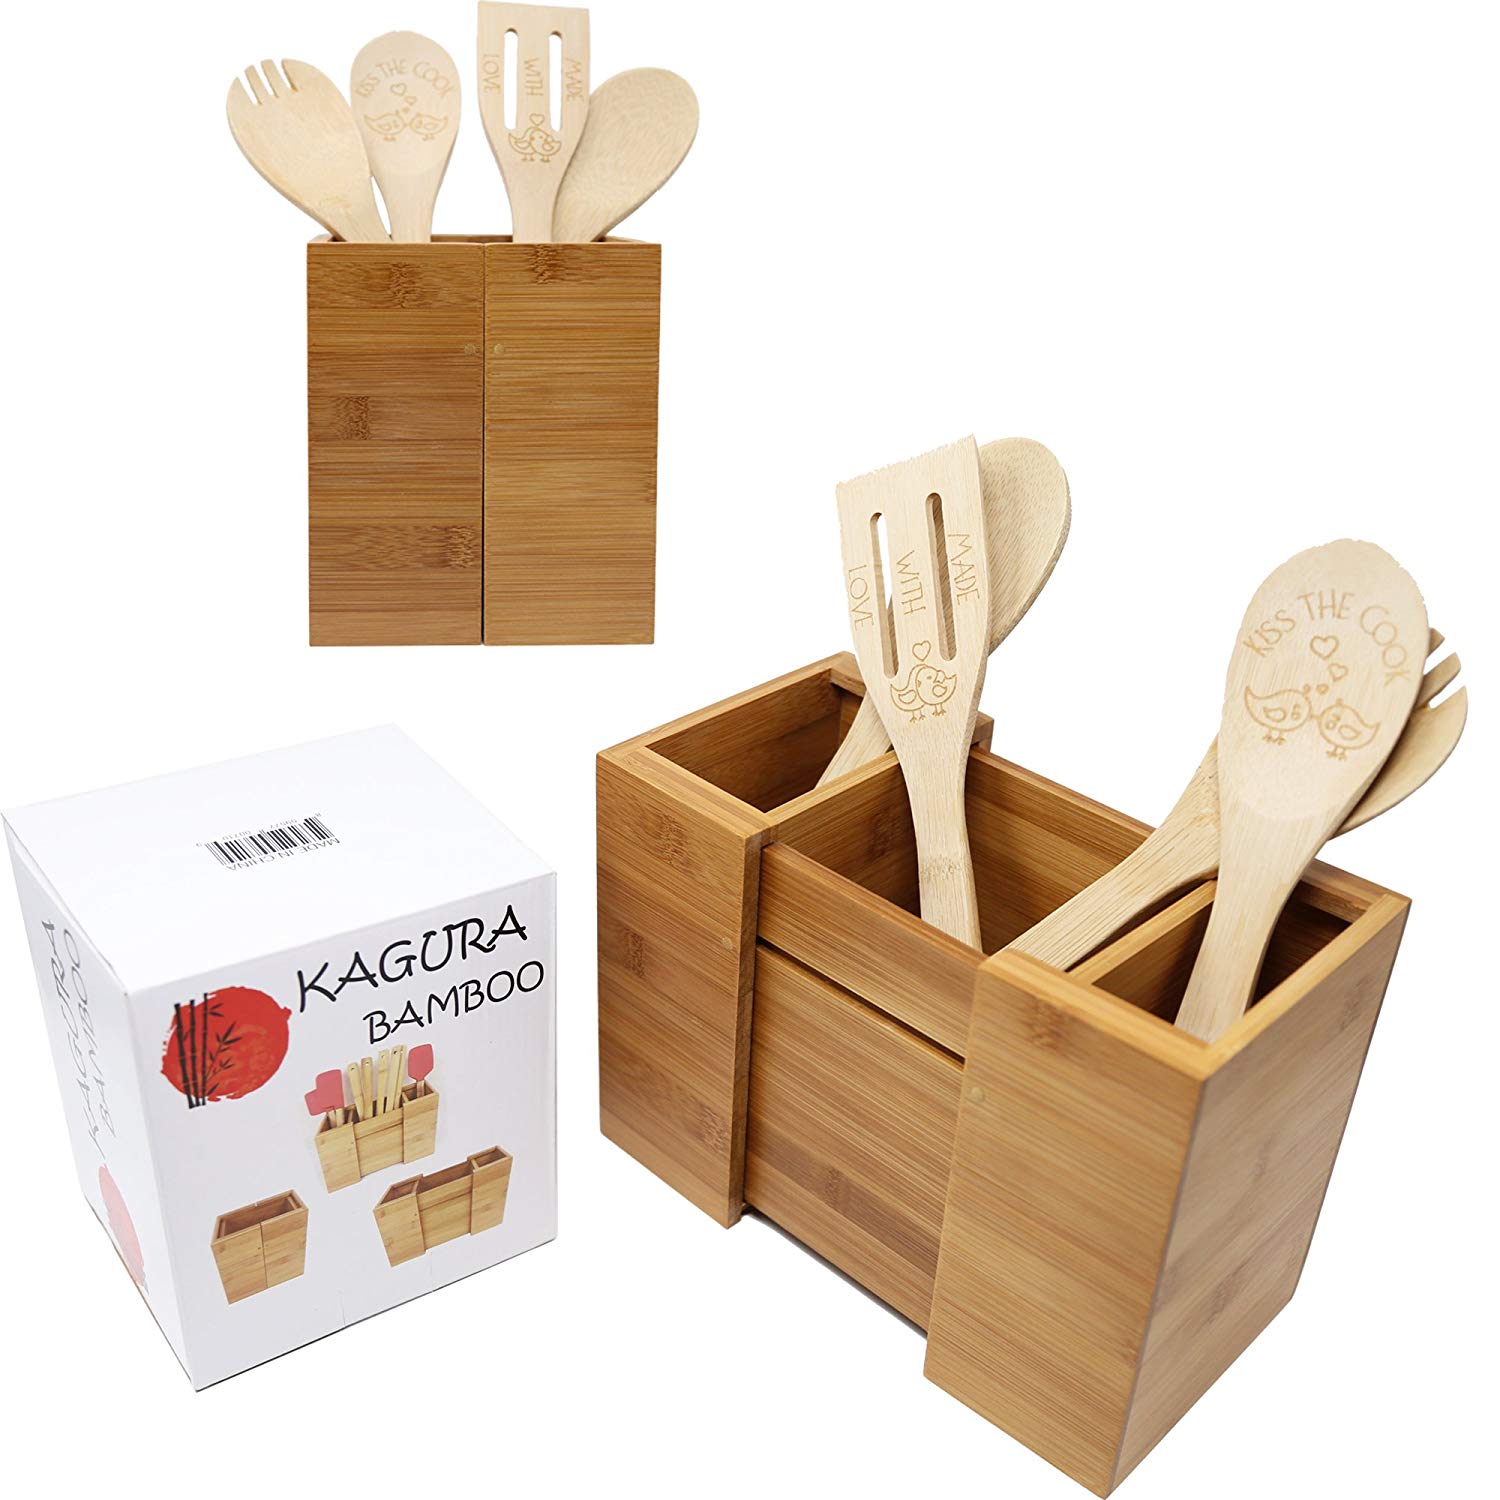 Bamboo Expandable Utensil Holder Organizer|Constructed from 100% Real Bamboo Wood● Durable ●Dividers for Flatware and Kitchen Utensils